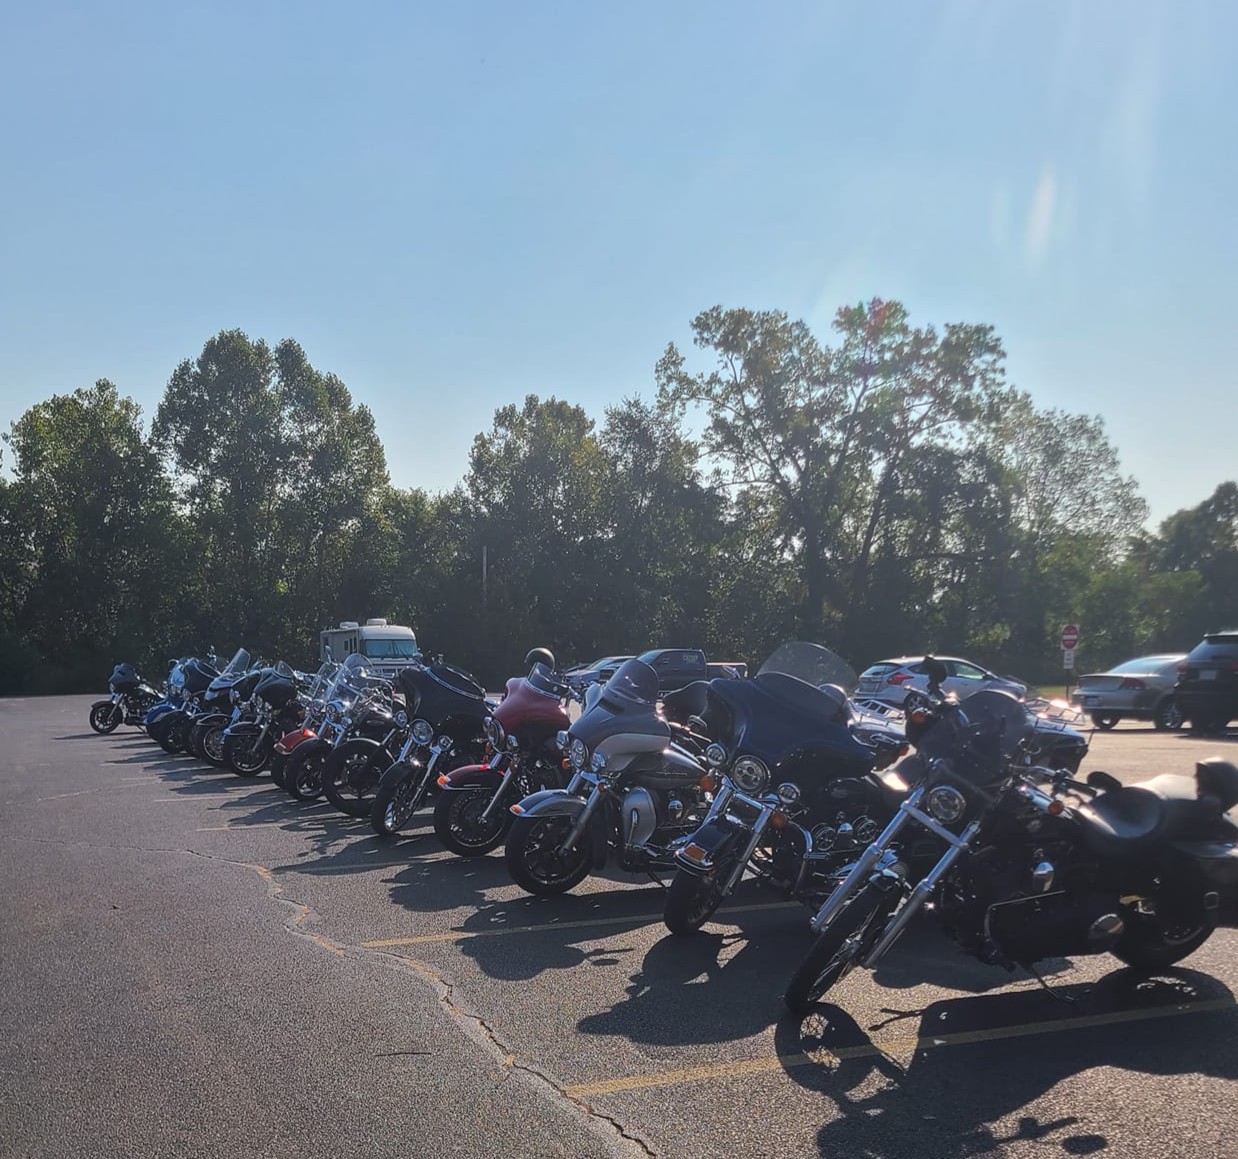 BackStoppers Benefit Rides a Success